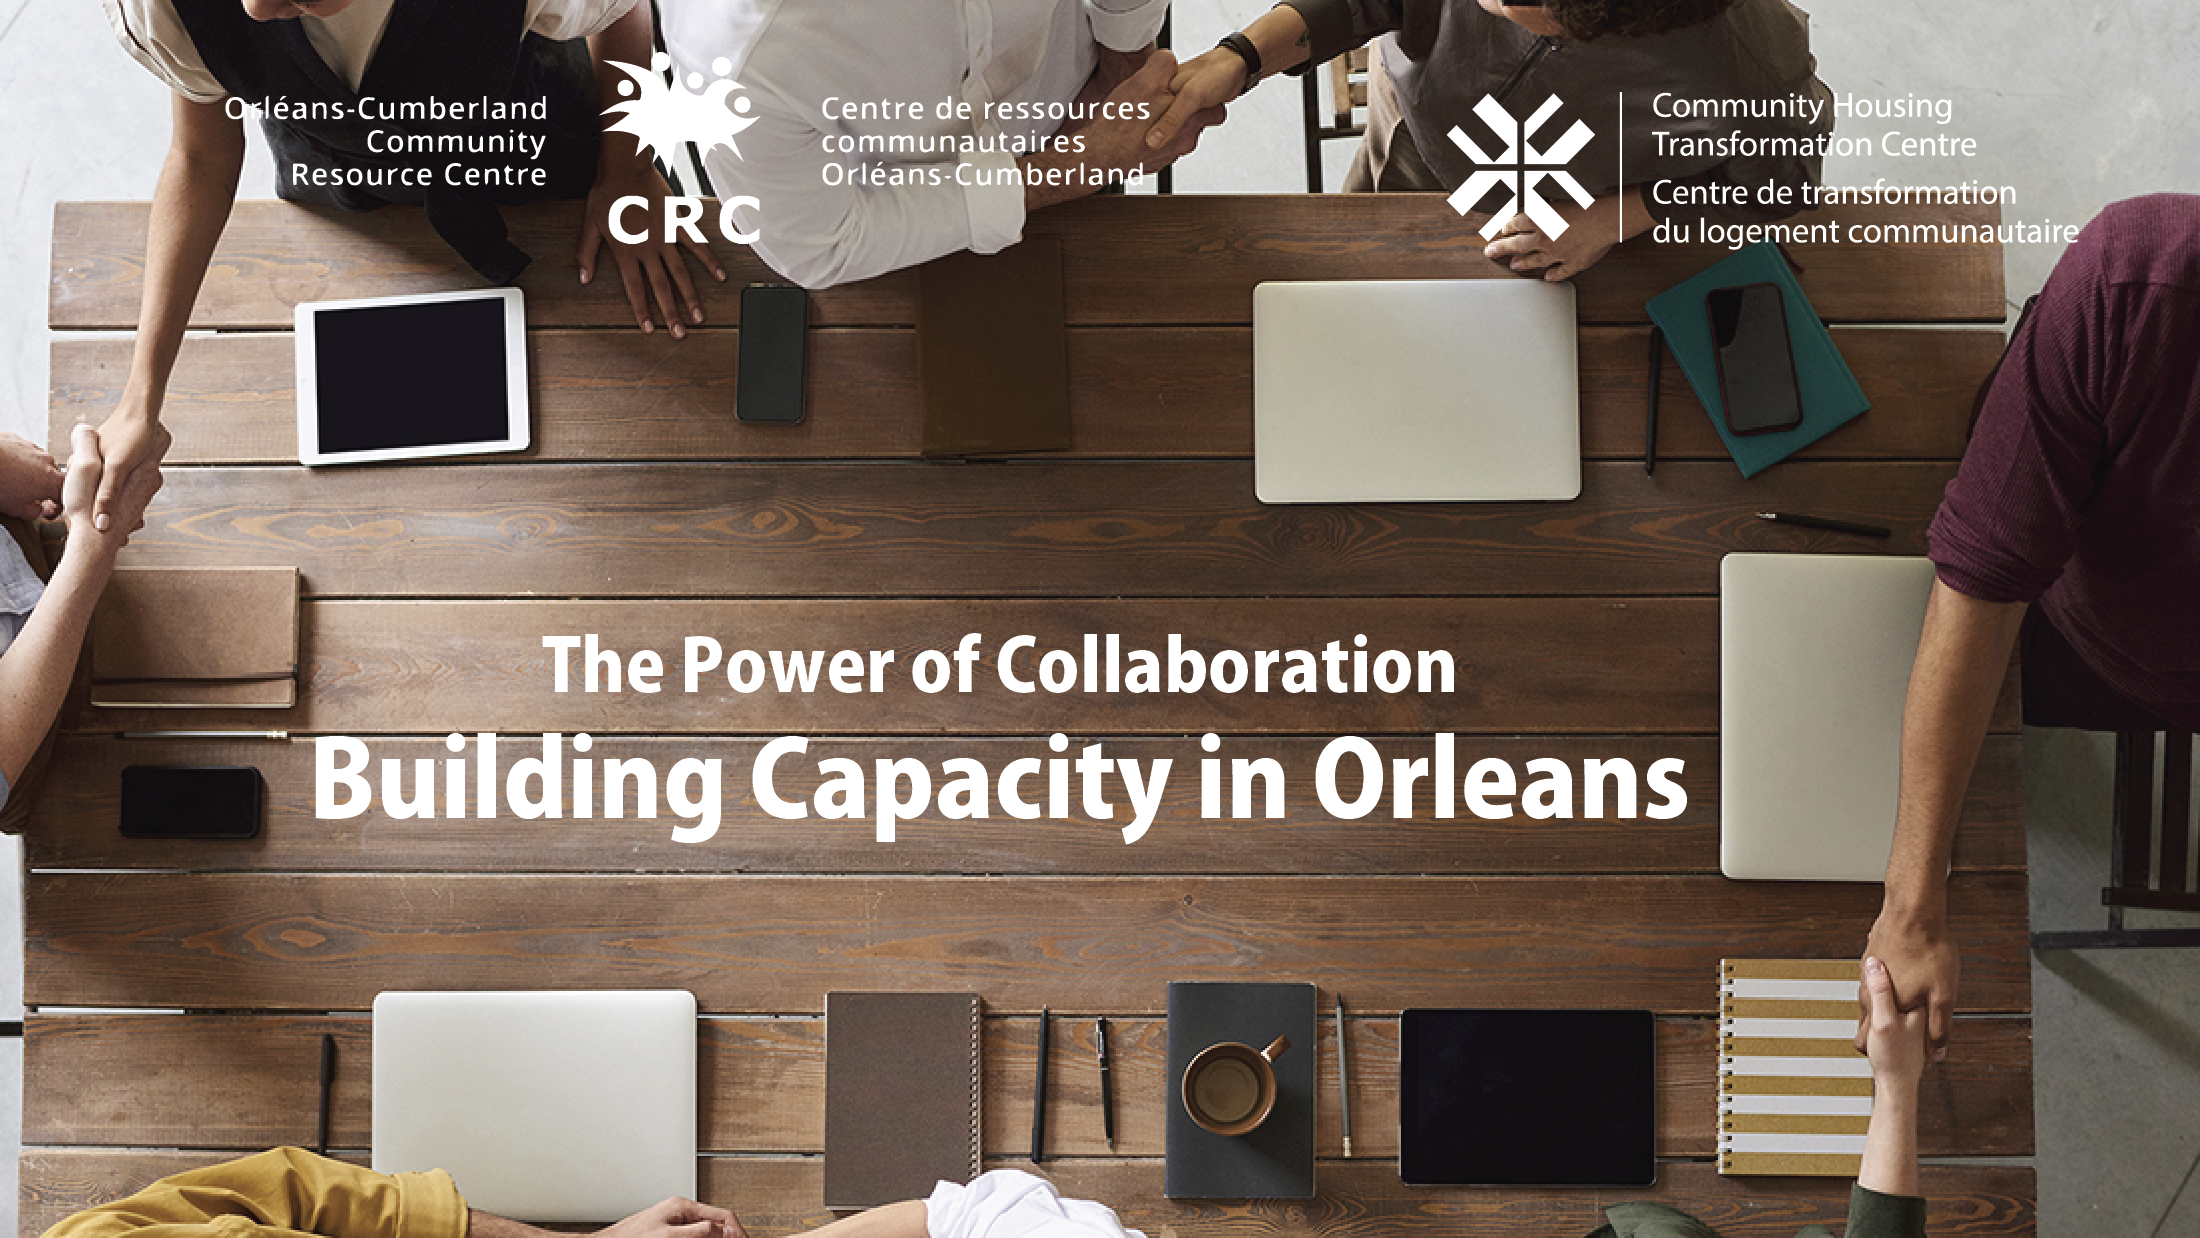 Building Capacity in Orleans through Collaboration